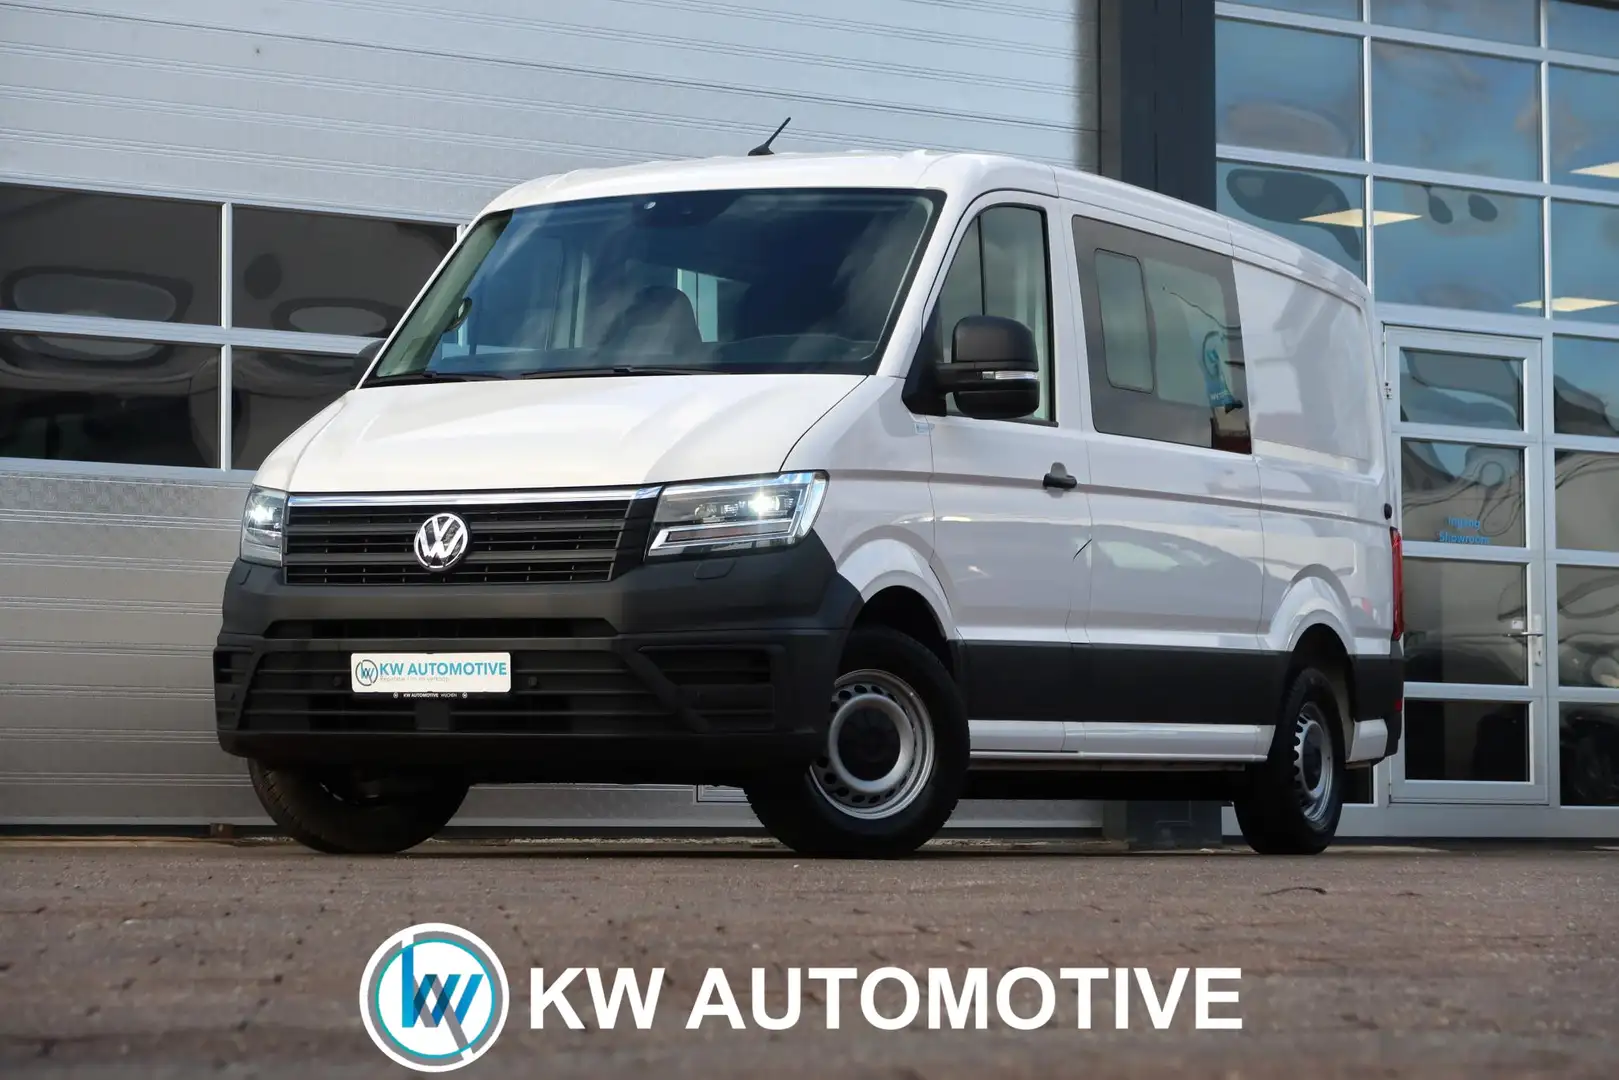 Volkswagen Crafter 35 2.0 TDI L3H2 DC AUT/ LED/ CAMERA/ ACC/ AIRCO/ T White - 1